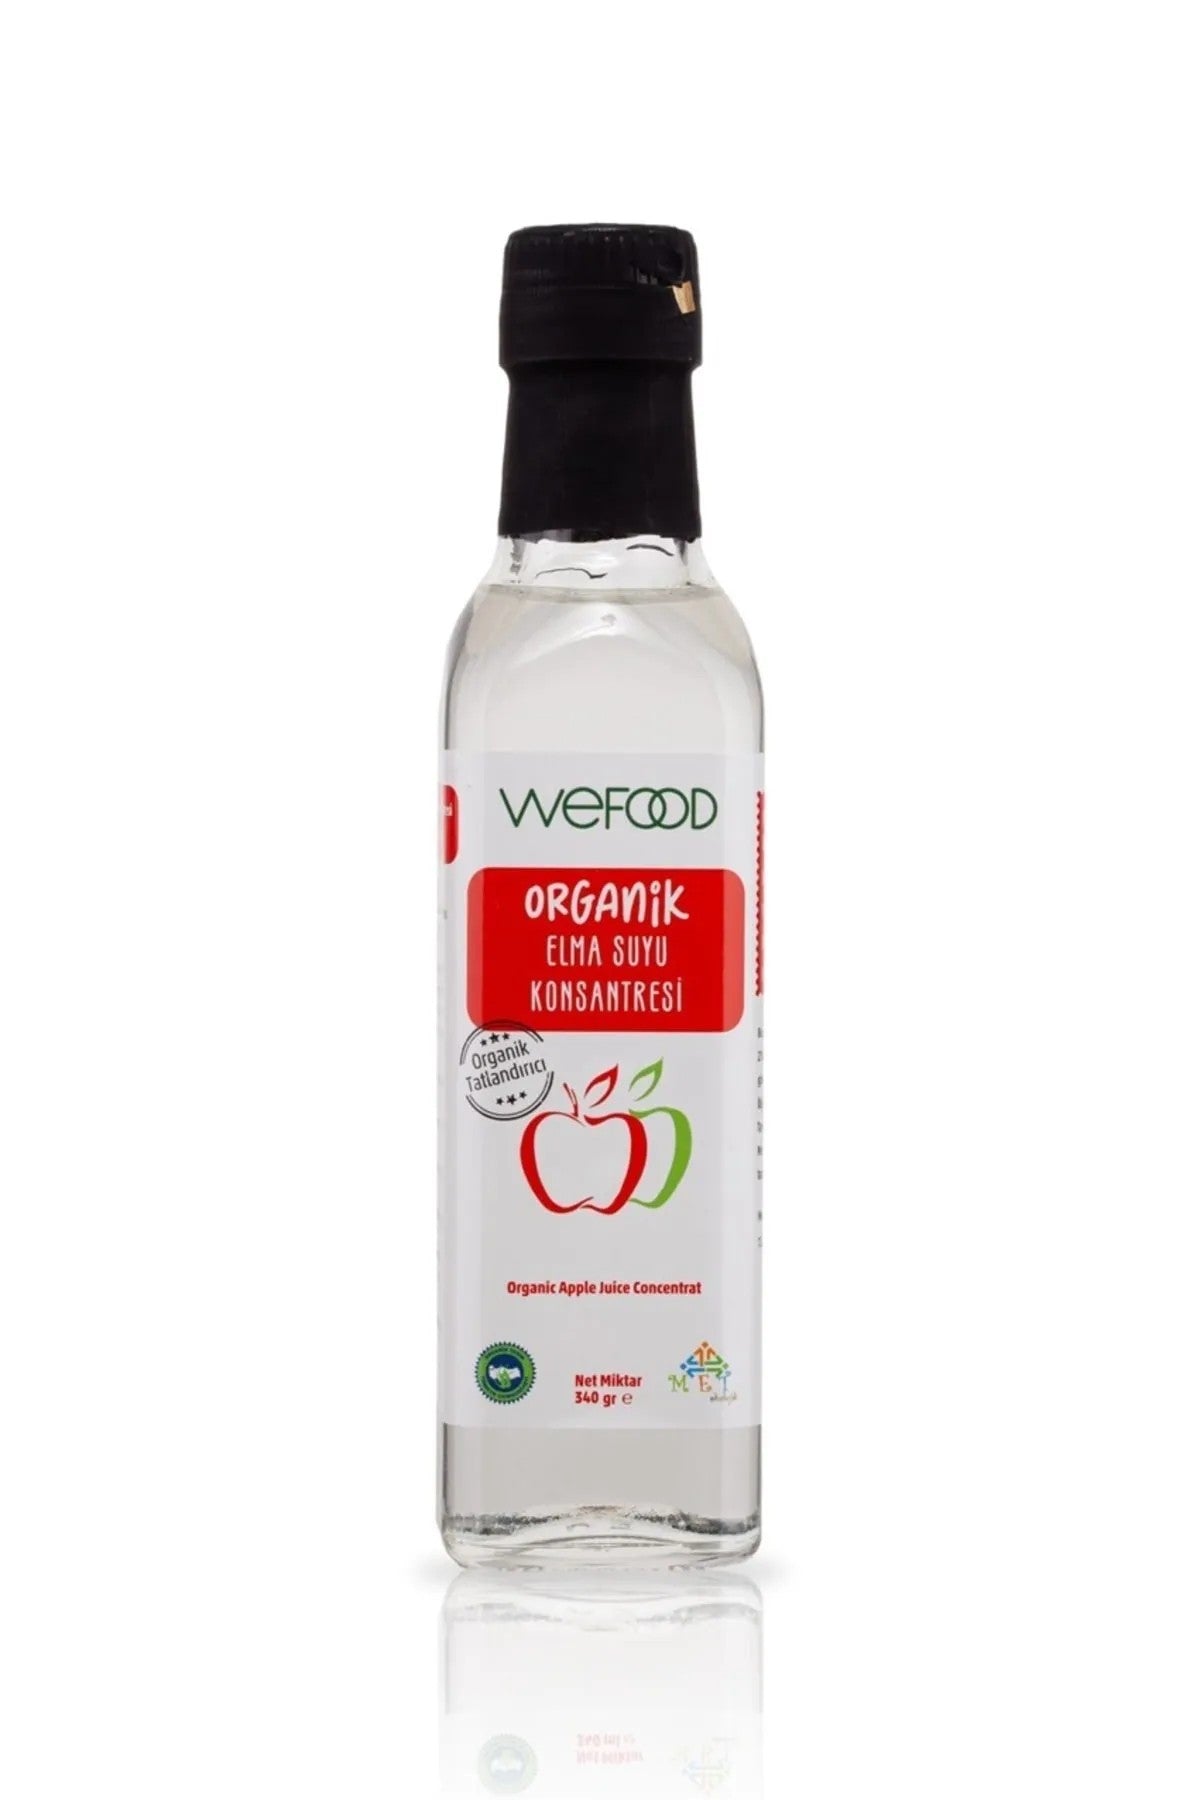 WEFOOD Org Apple Juice Concentrate 340 ml